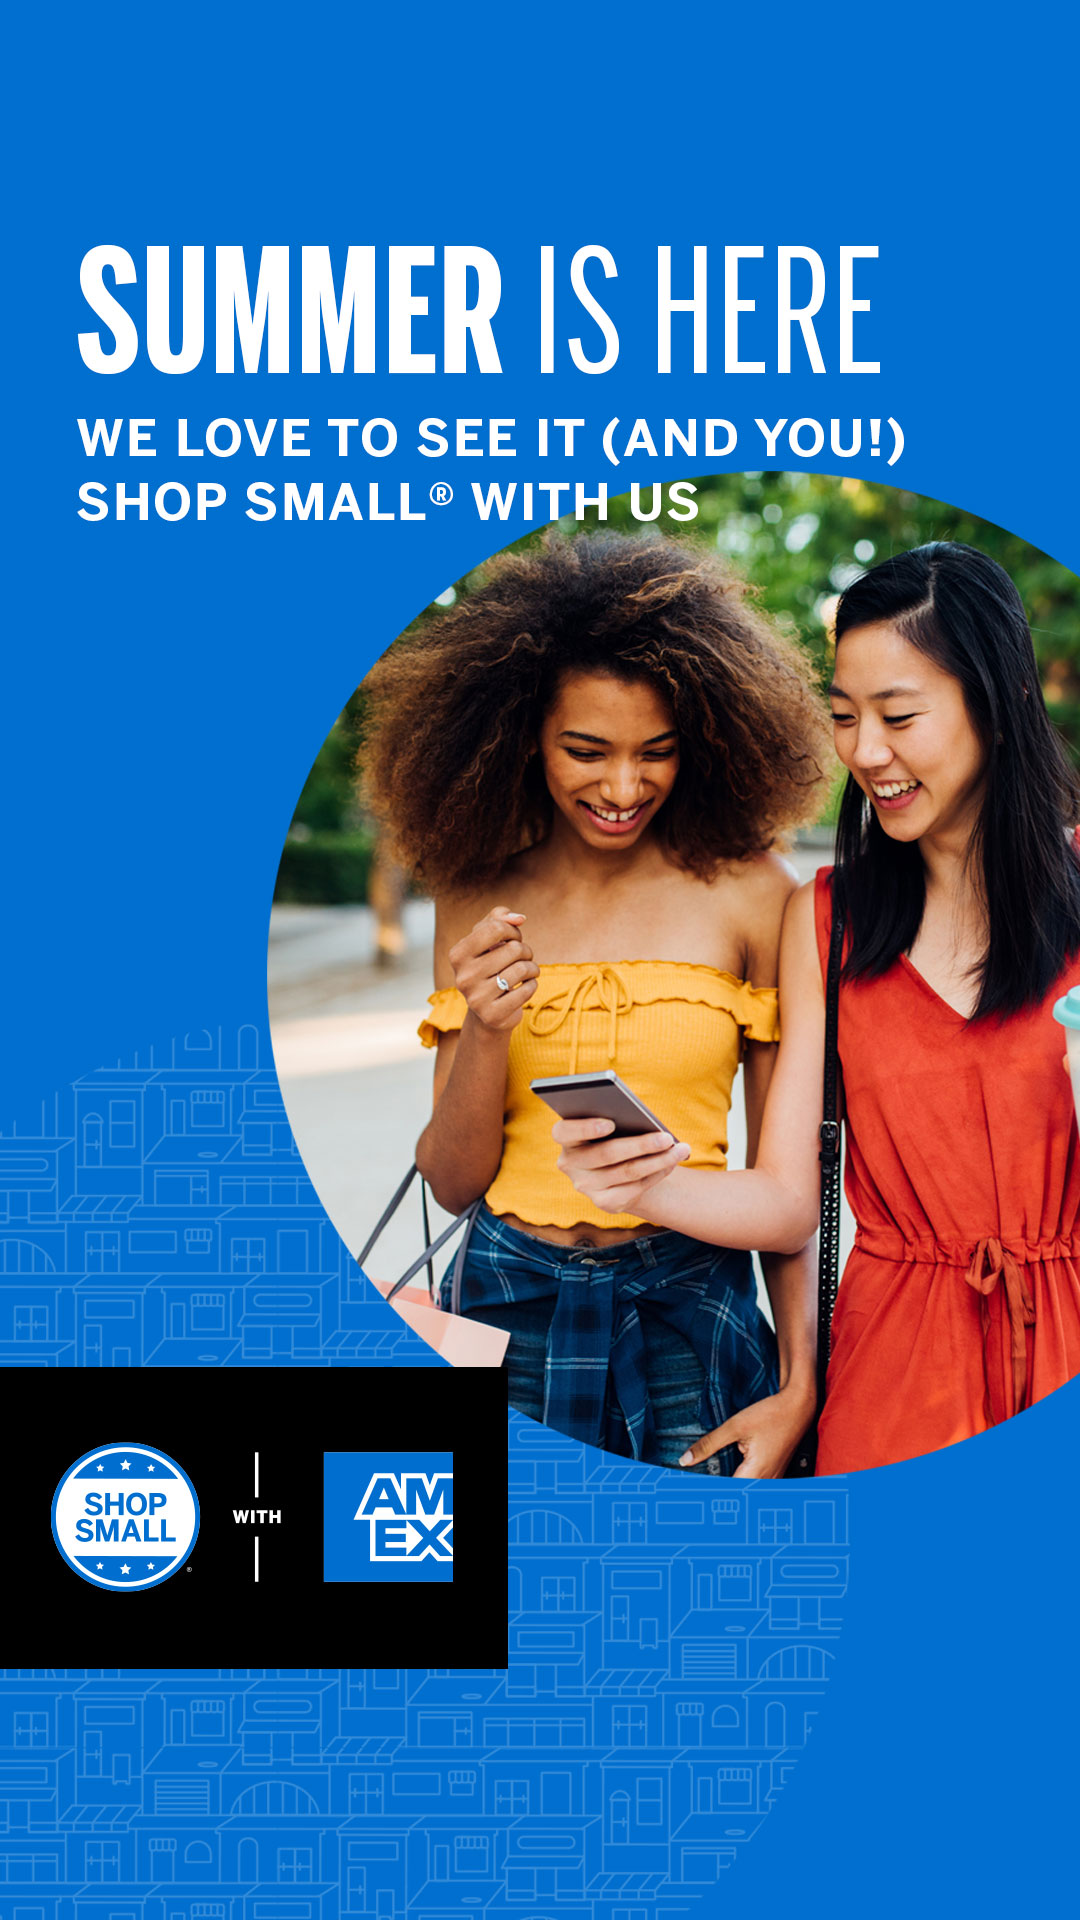 Graphic with an image of two women walking outside and looking at a phone. Message overlaid says Summer is here. We love to see it (and you) shop small with us.